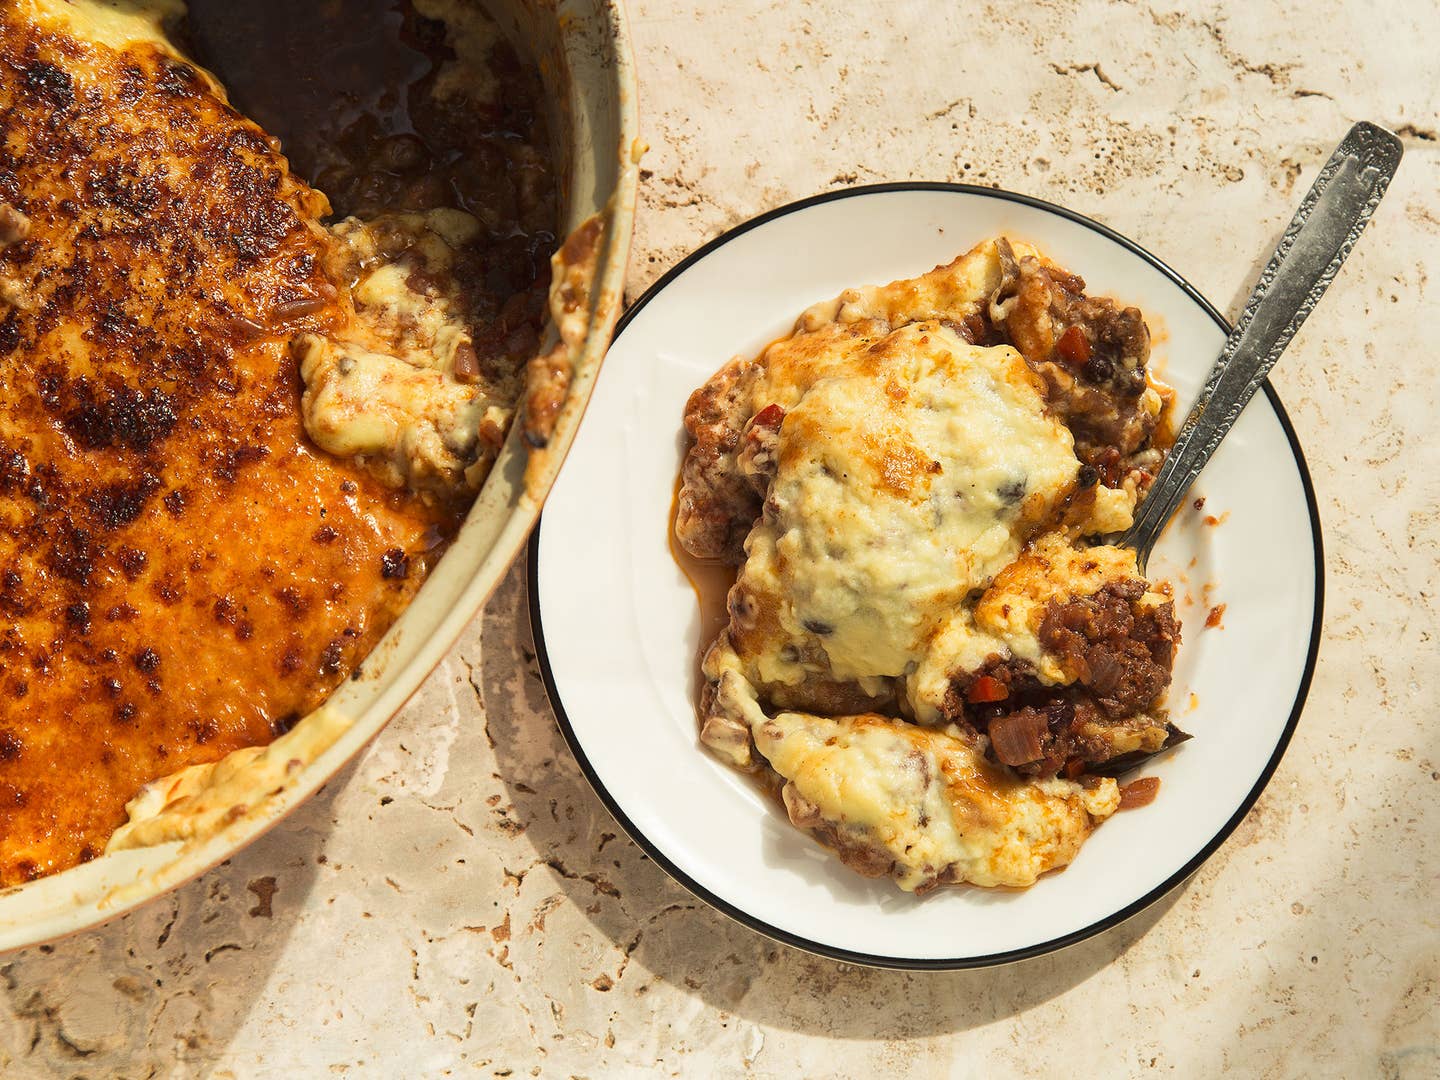 Greek Moussaka is the One-Dish Meal With a Little Bit of Everything